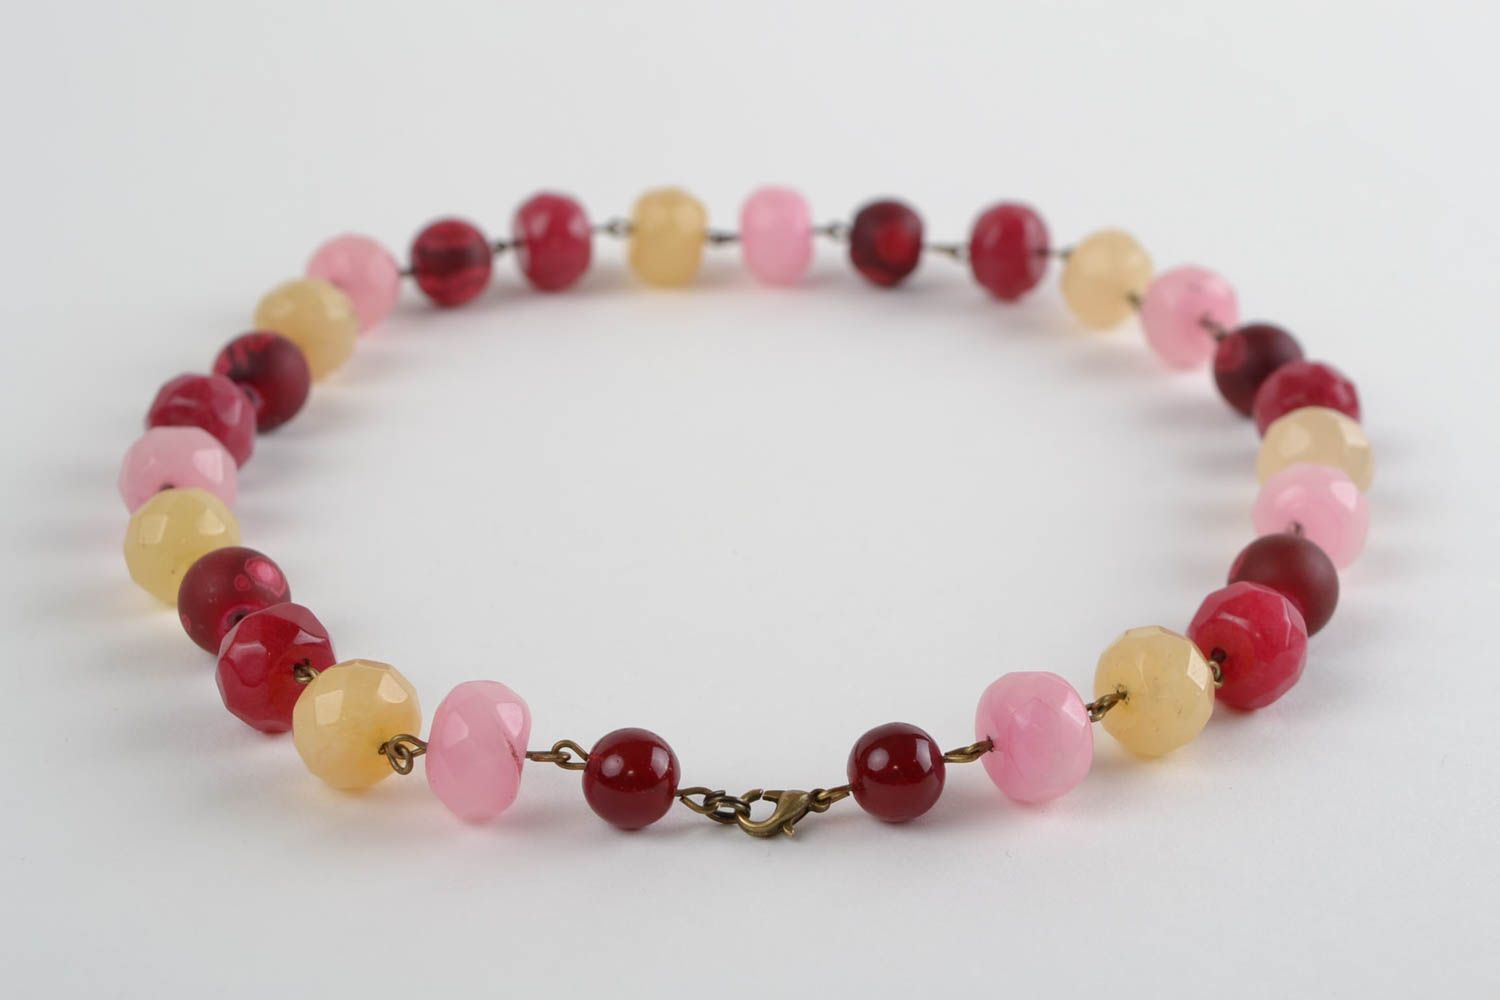 Handmade designer colorful agate coral and glass bead necklace pink and beige photo 4